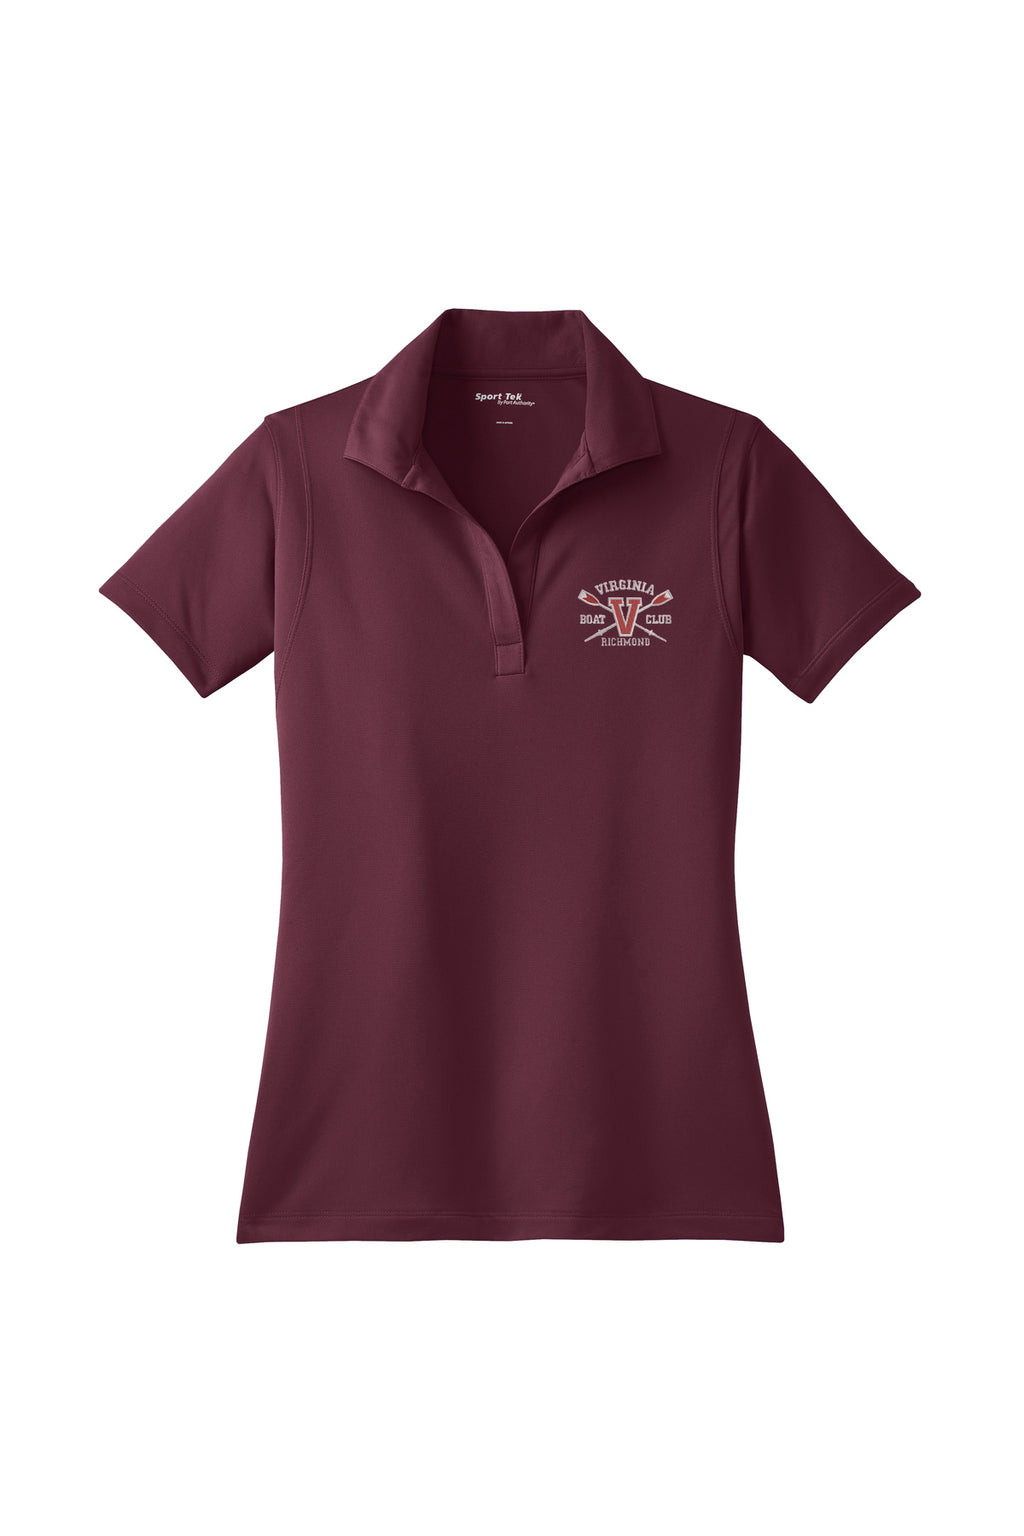 Virginia Boat Club Embroidered Performance Ladies Polo